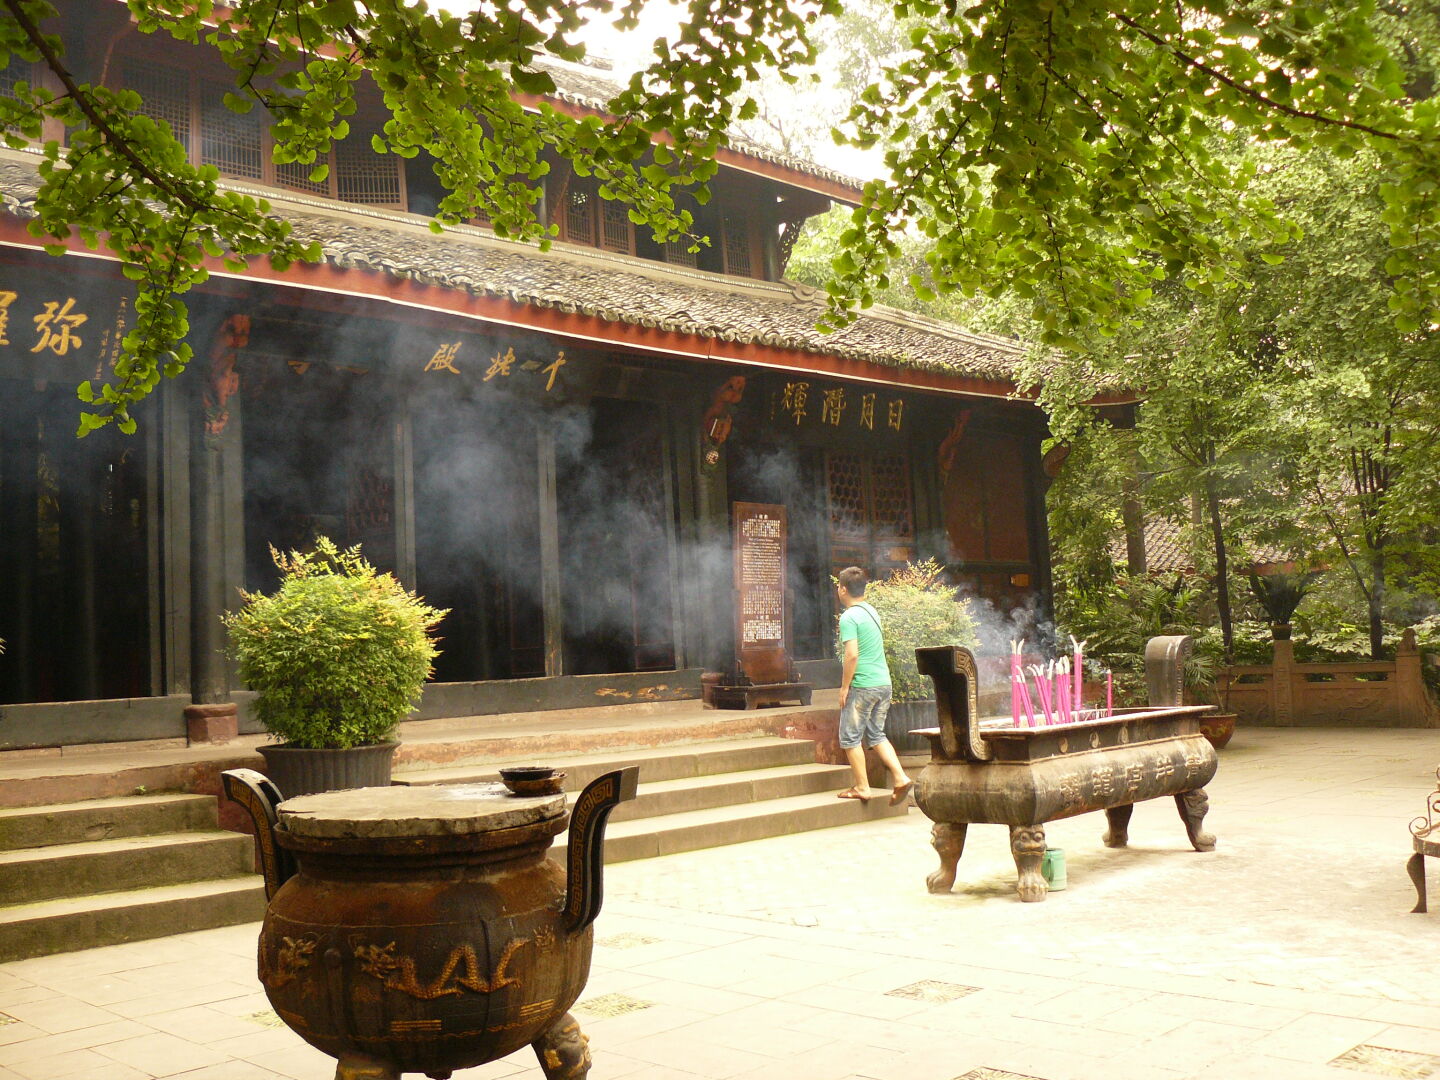 This is one of the temple halls at the Taoist temple district of Qingyang. There were signs saying that photography is not permitted, but none of the Chinese visitors heeded them. Maybe they just referred to the insides of the temples. The Taoists seem to have an awful lot of goddesses and holy people. There were about 10 of these buildings on the premises, most of which contained statues of two or more important figures, none of them duplicates.